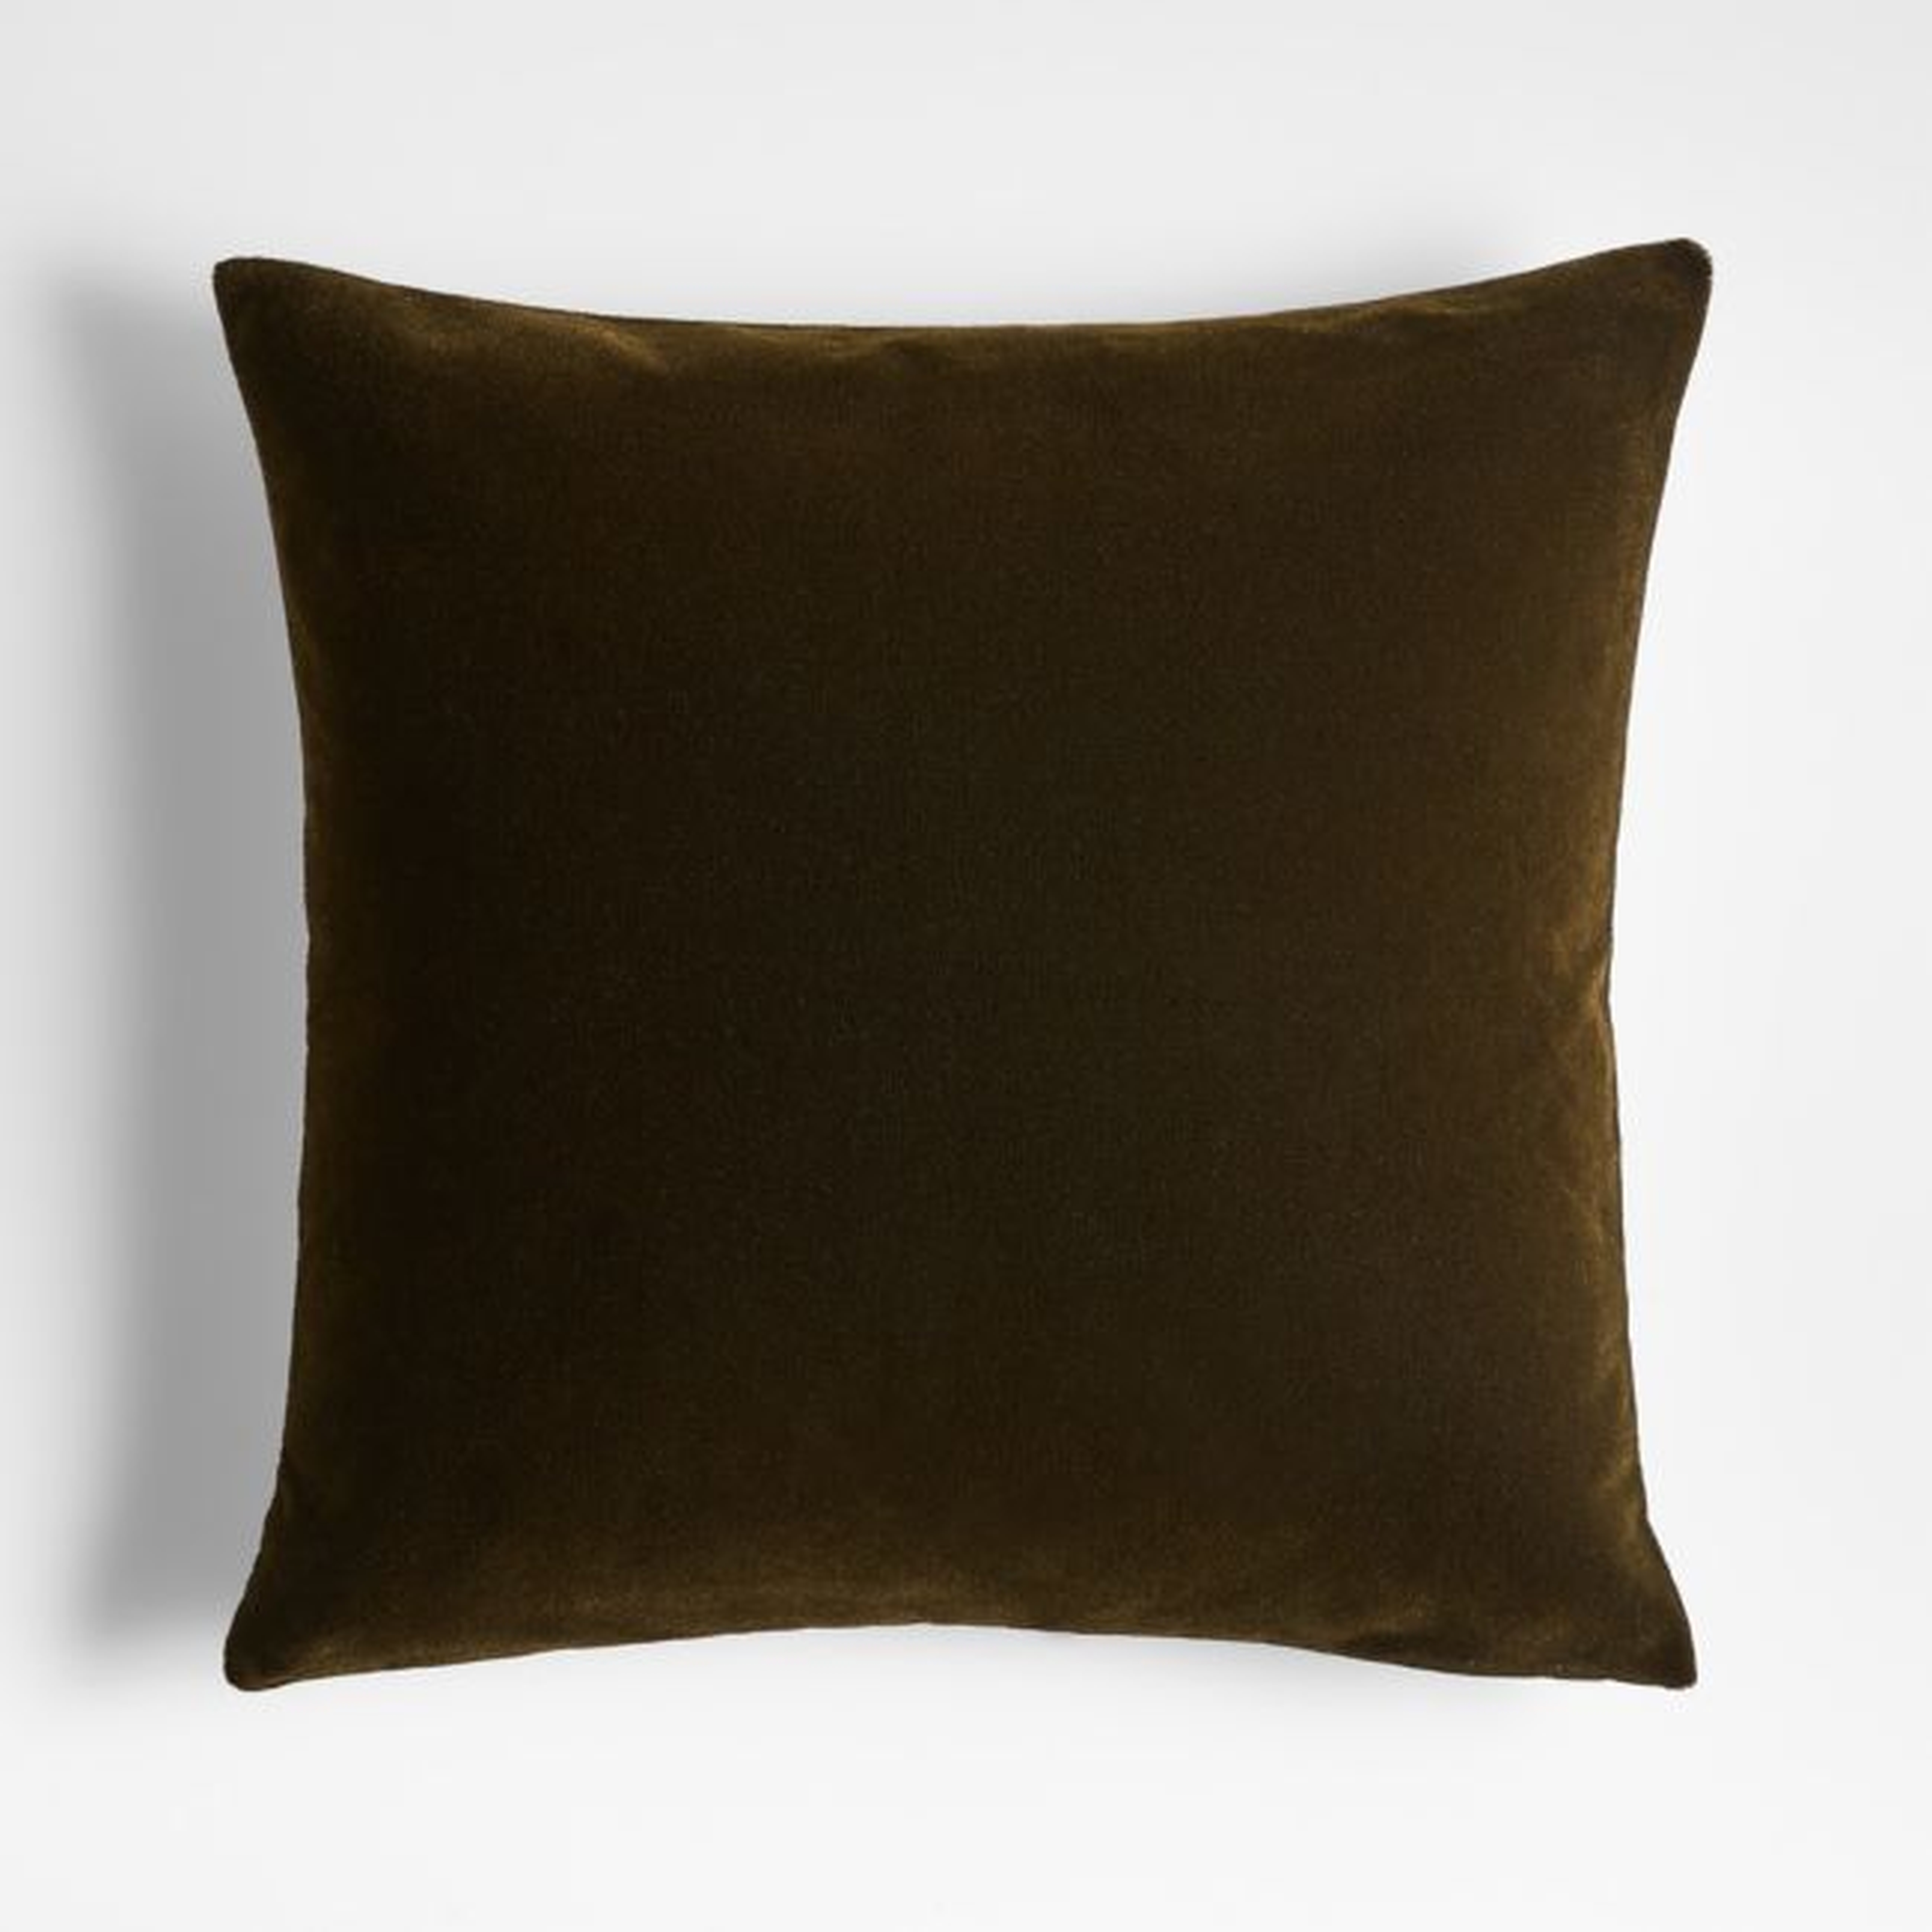 Martini Olive 20"x20" Faux Mohair Throw Pillow Cover - Crate and Barrel